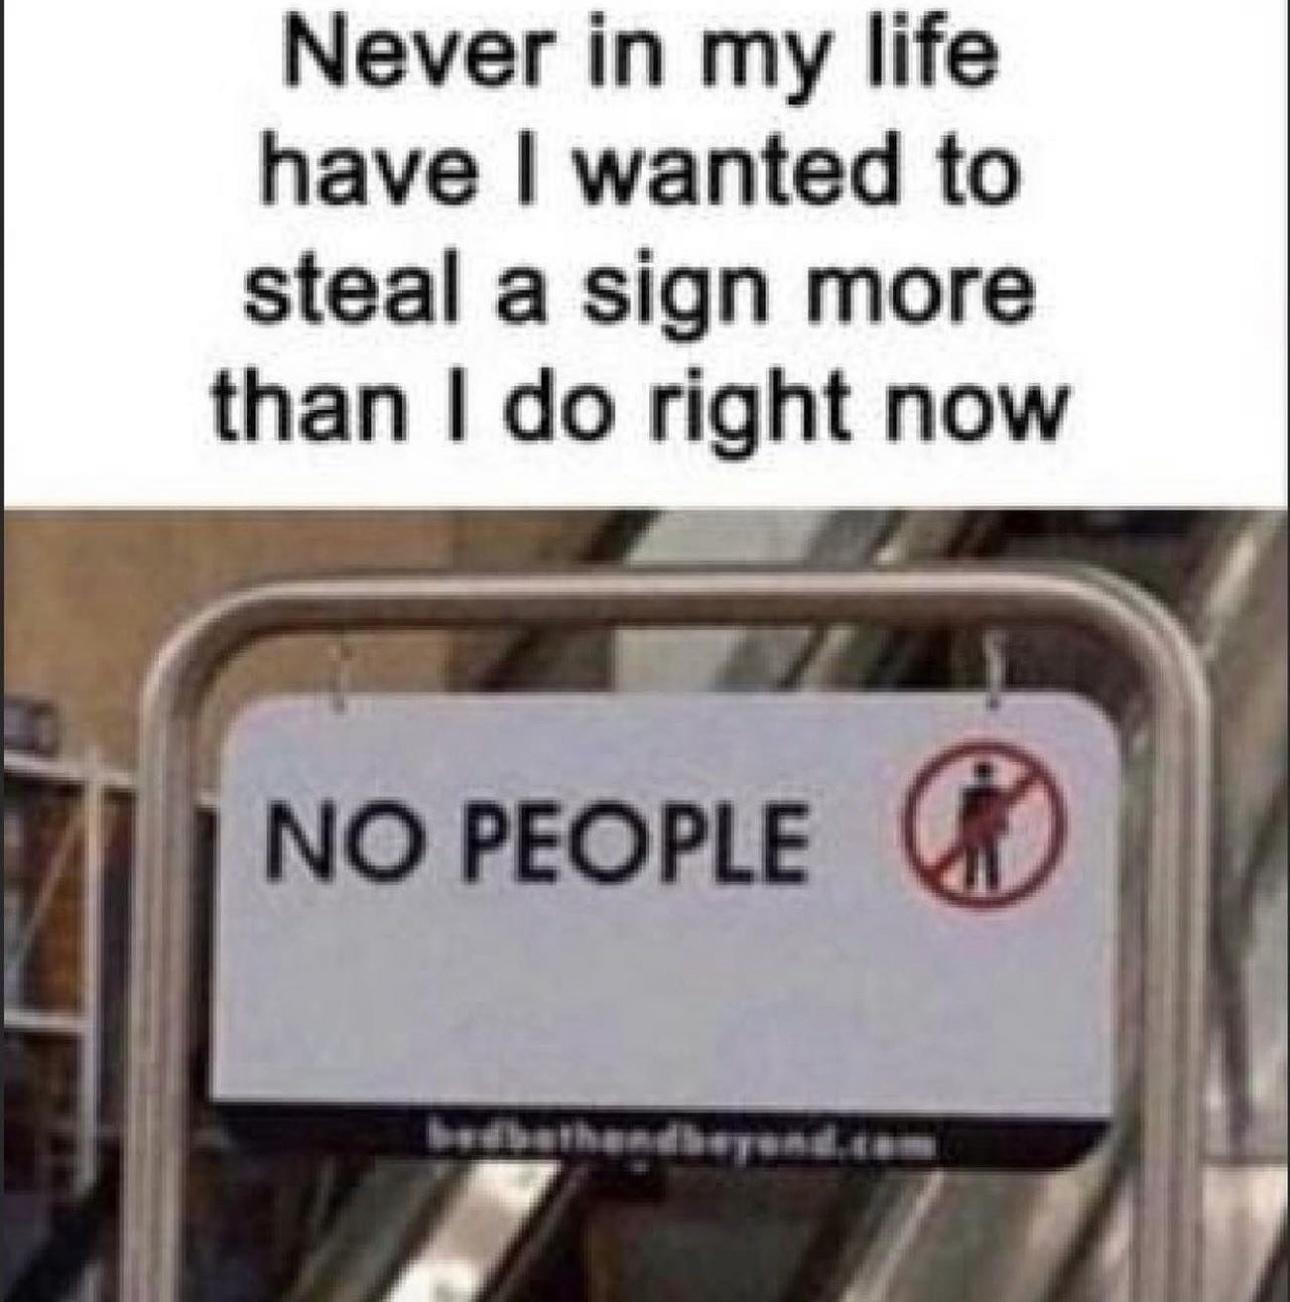 dank memes - no people meme - Never in my life have I wanted to steal a sign more than I do right now No People